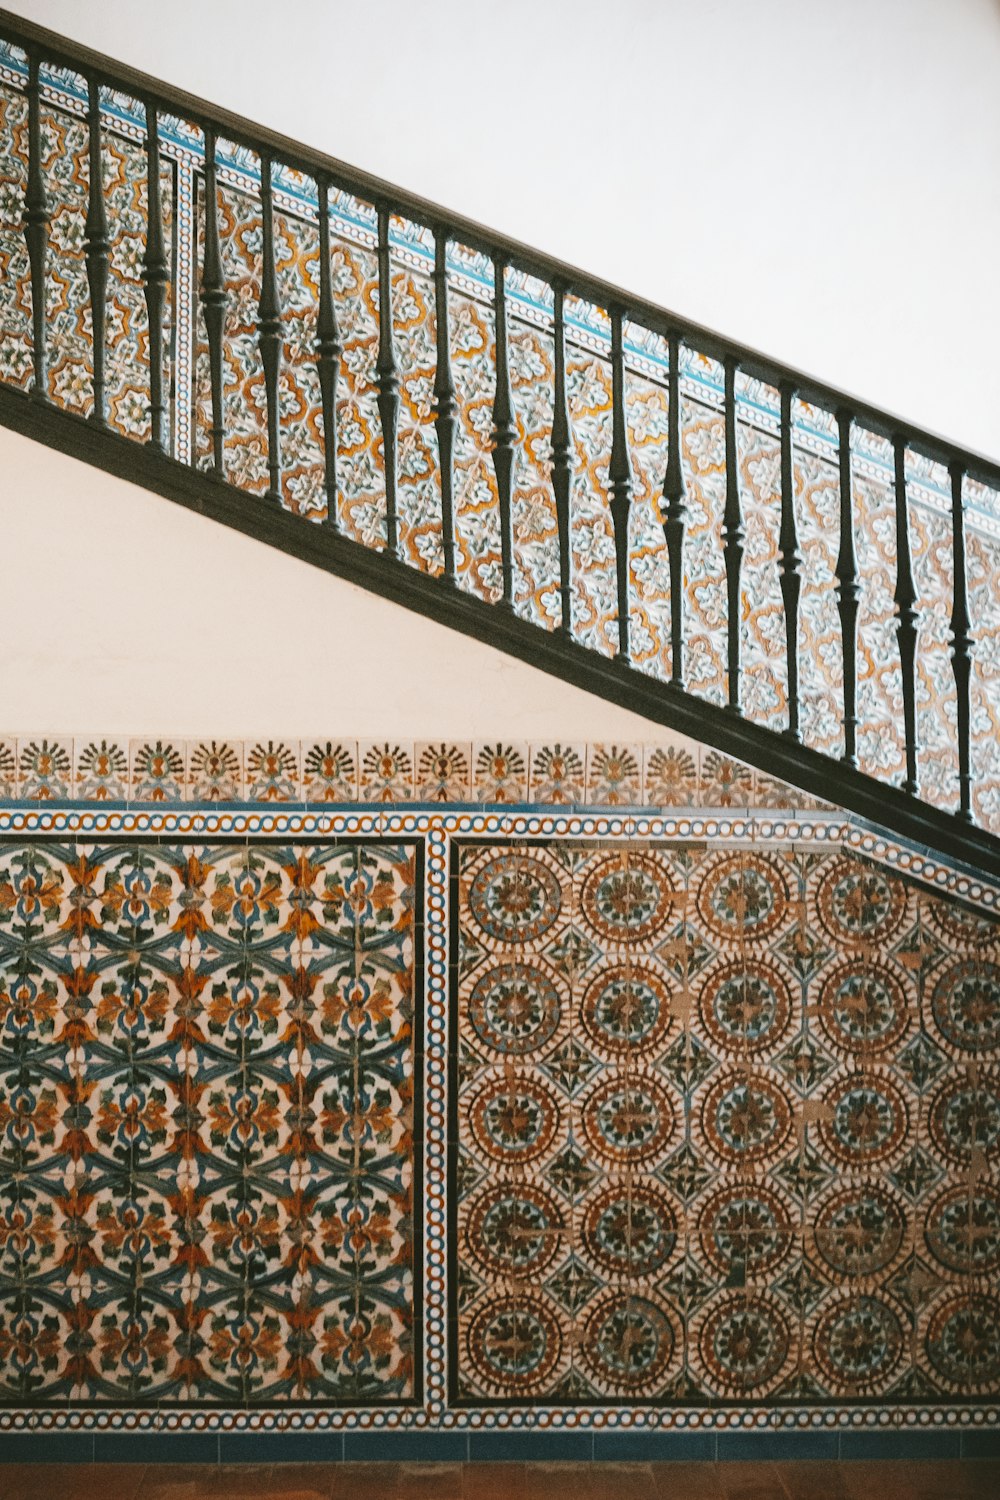 Moroccan design on the wall